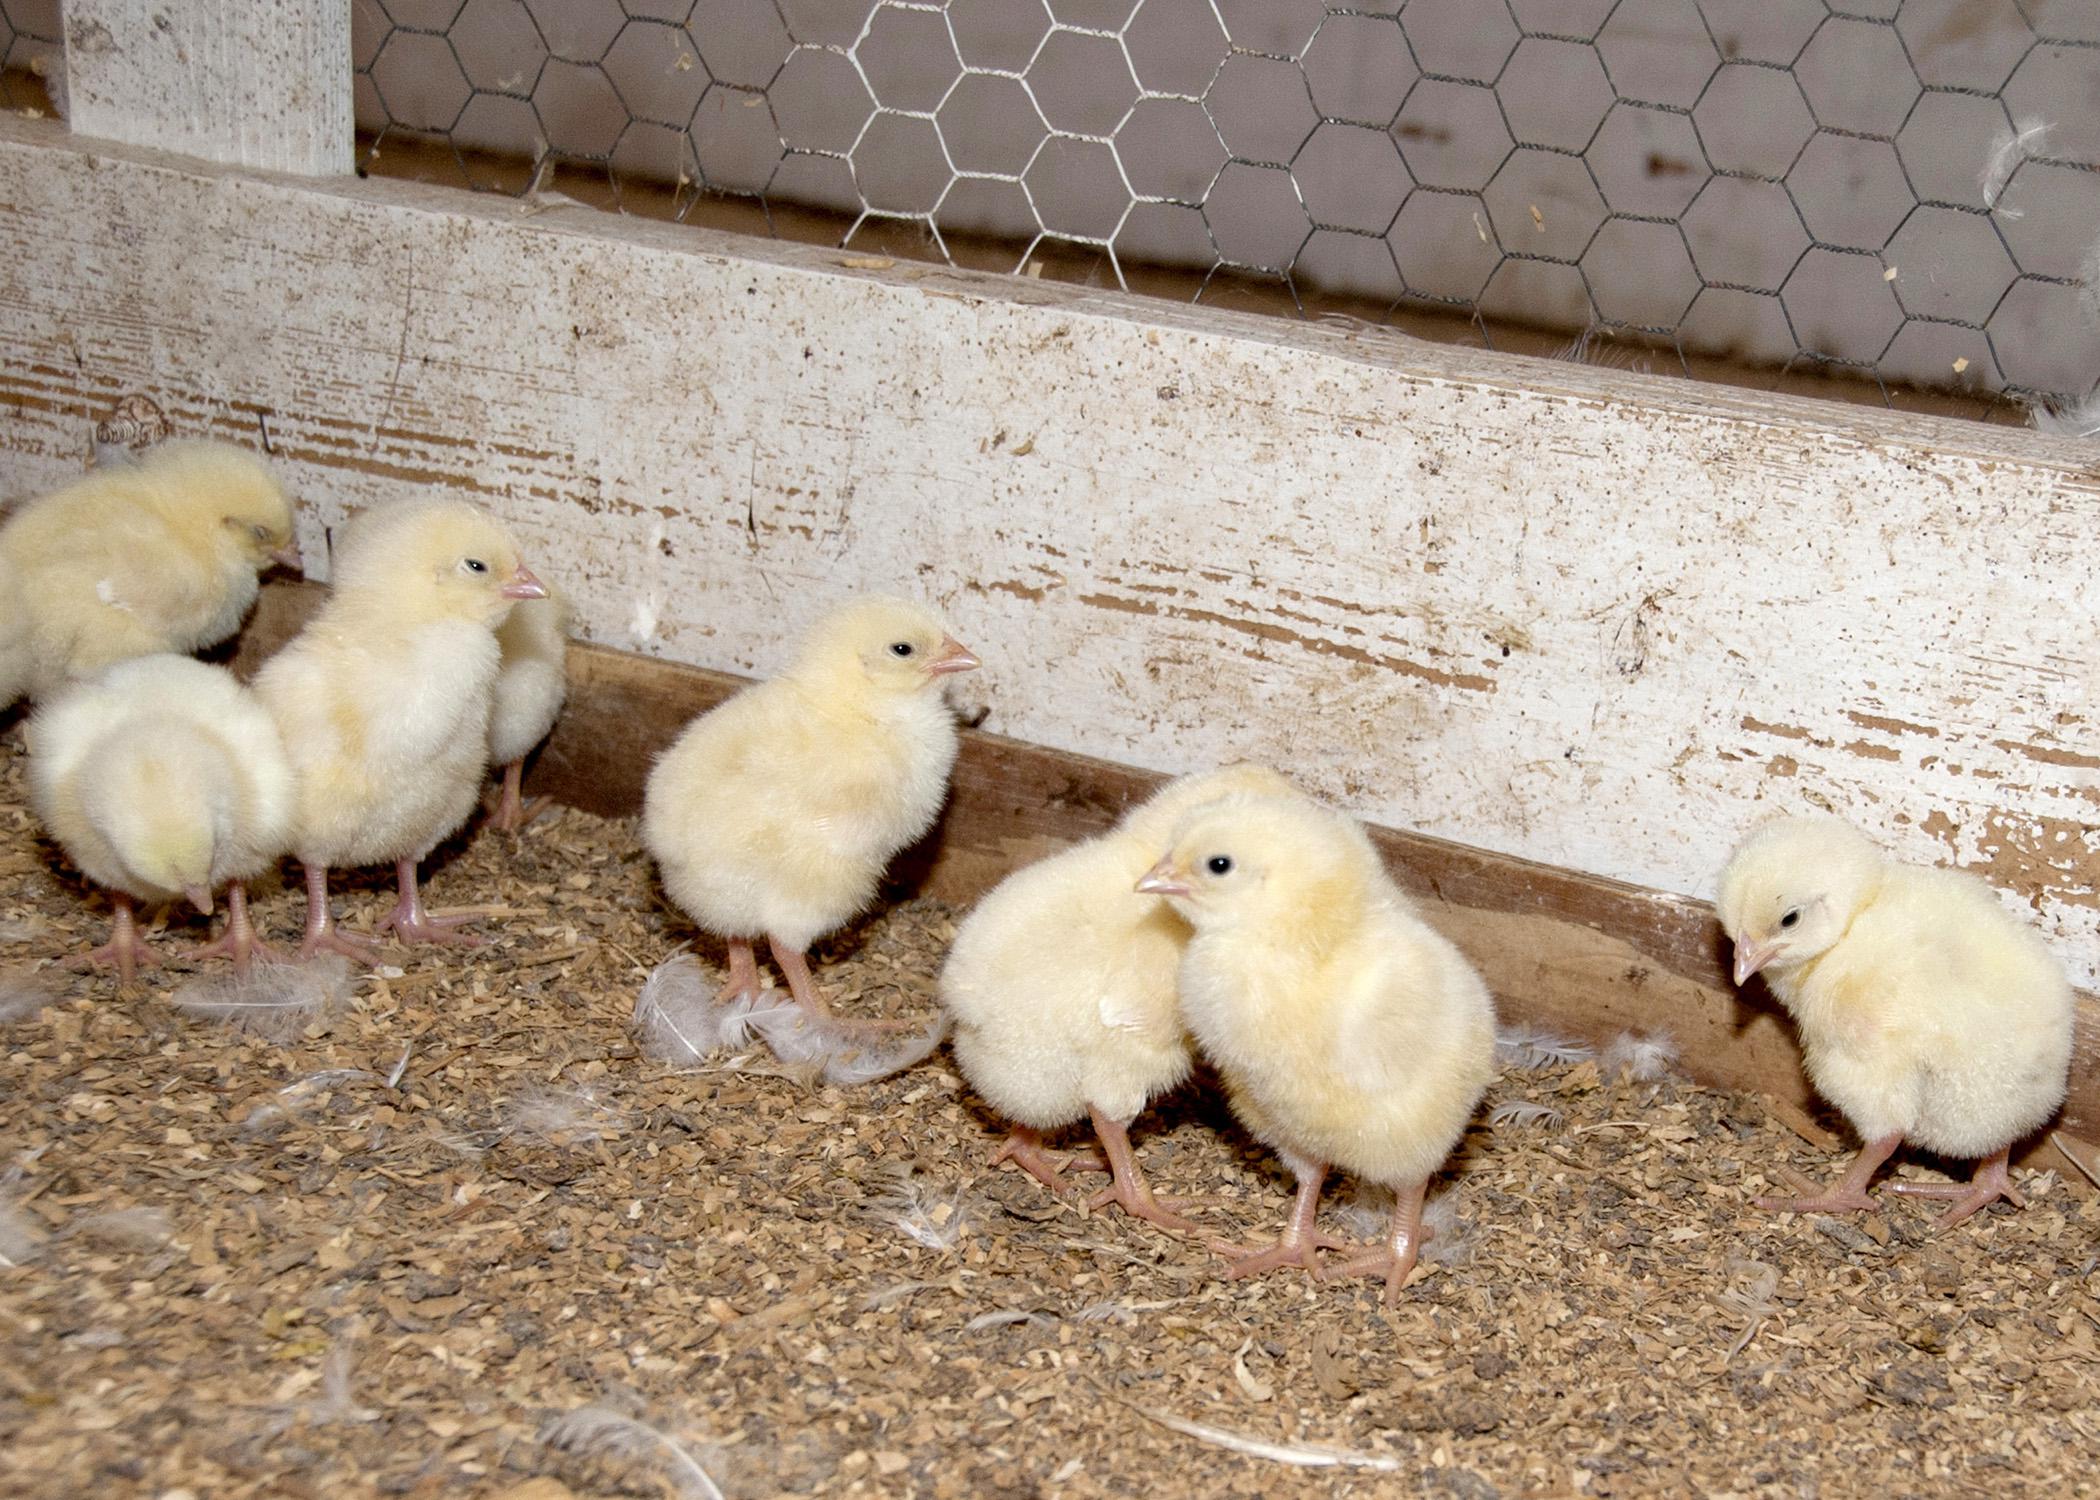 Mississippi State University Extension Service poultry experts are scheduling their hatch-out program, which supplies Mississippi classrooms with the equipment needed for a week-long science project focused on hatching chicks. (Photo by MSU Ag Communications/Kat Lawrence)